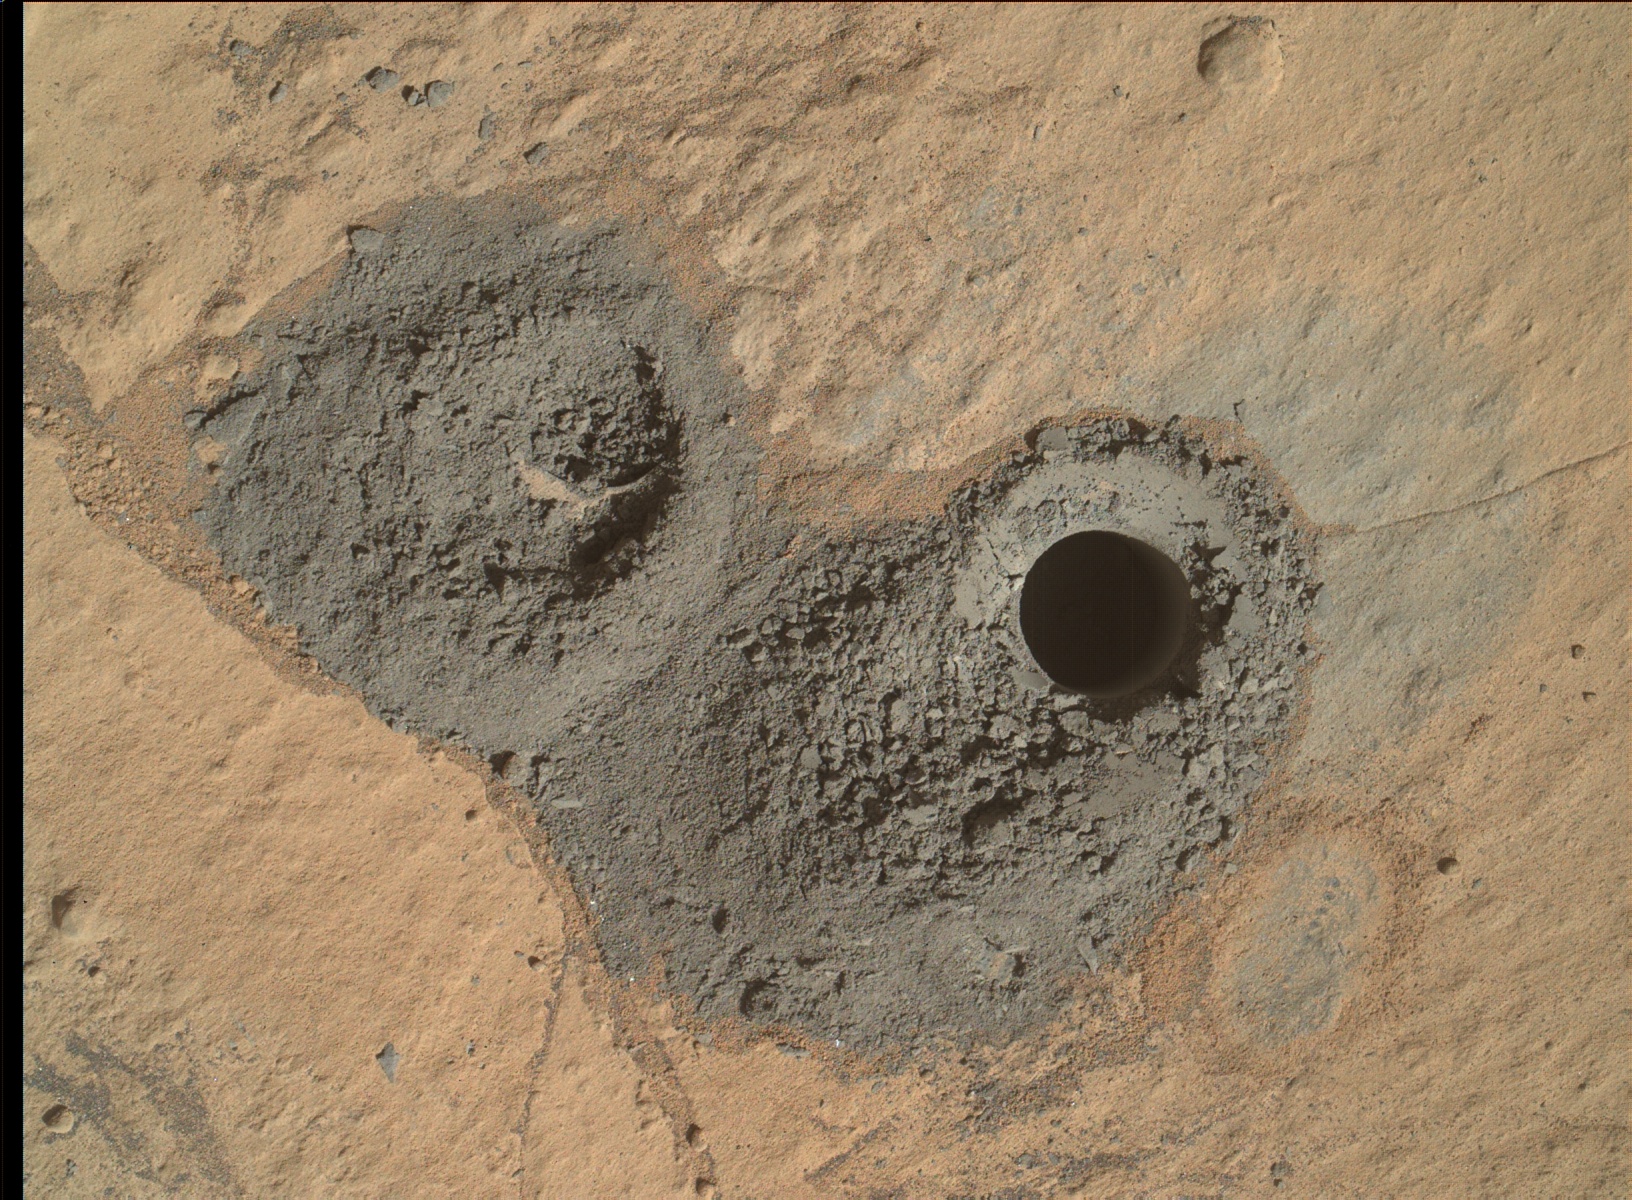 Nasa's Mars rover Curiosity acquired this image using its Mars Hand Lens Imager (MAHLI) on Sol 627, at drive 1330, site number 31